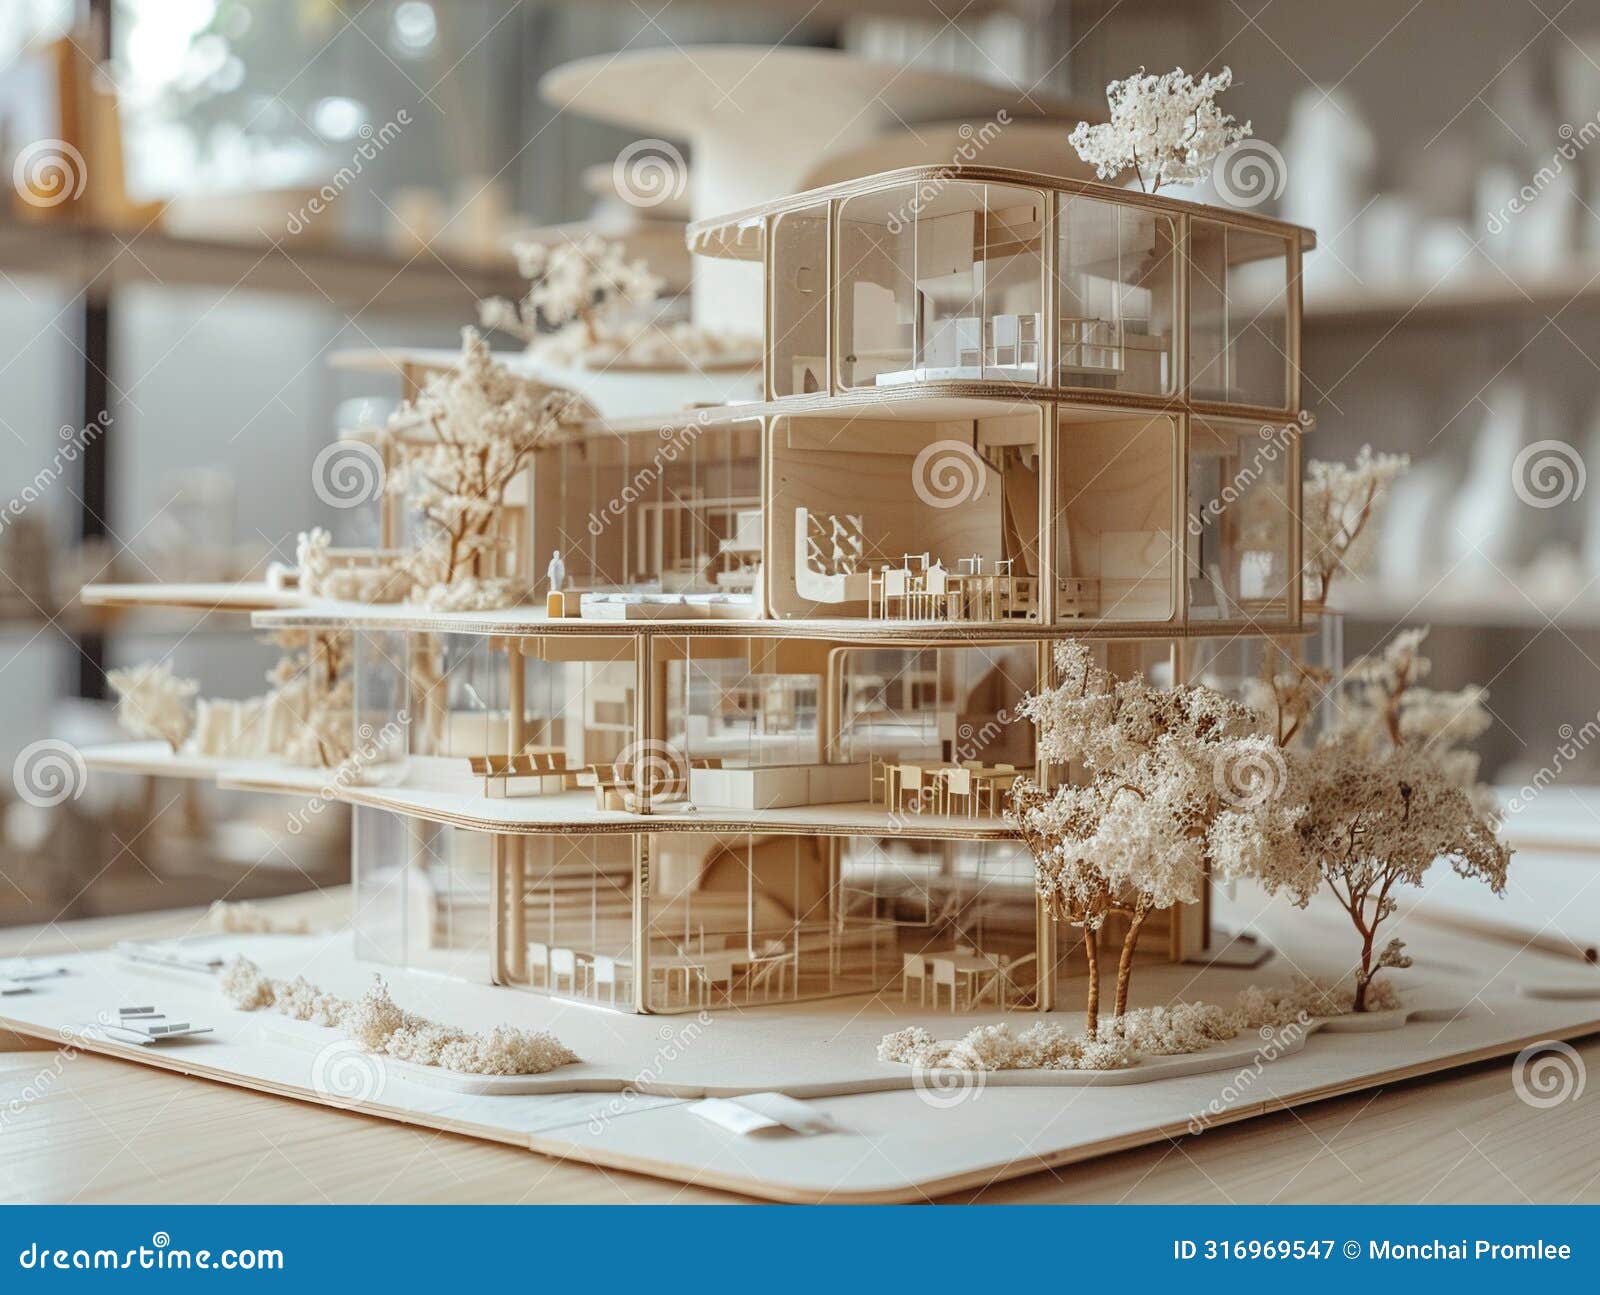 architects presenting a model of a modular construction project, emphasizing quality and biomimicry in sustainable building